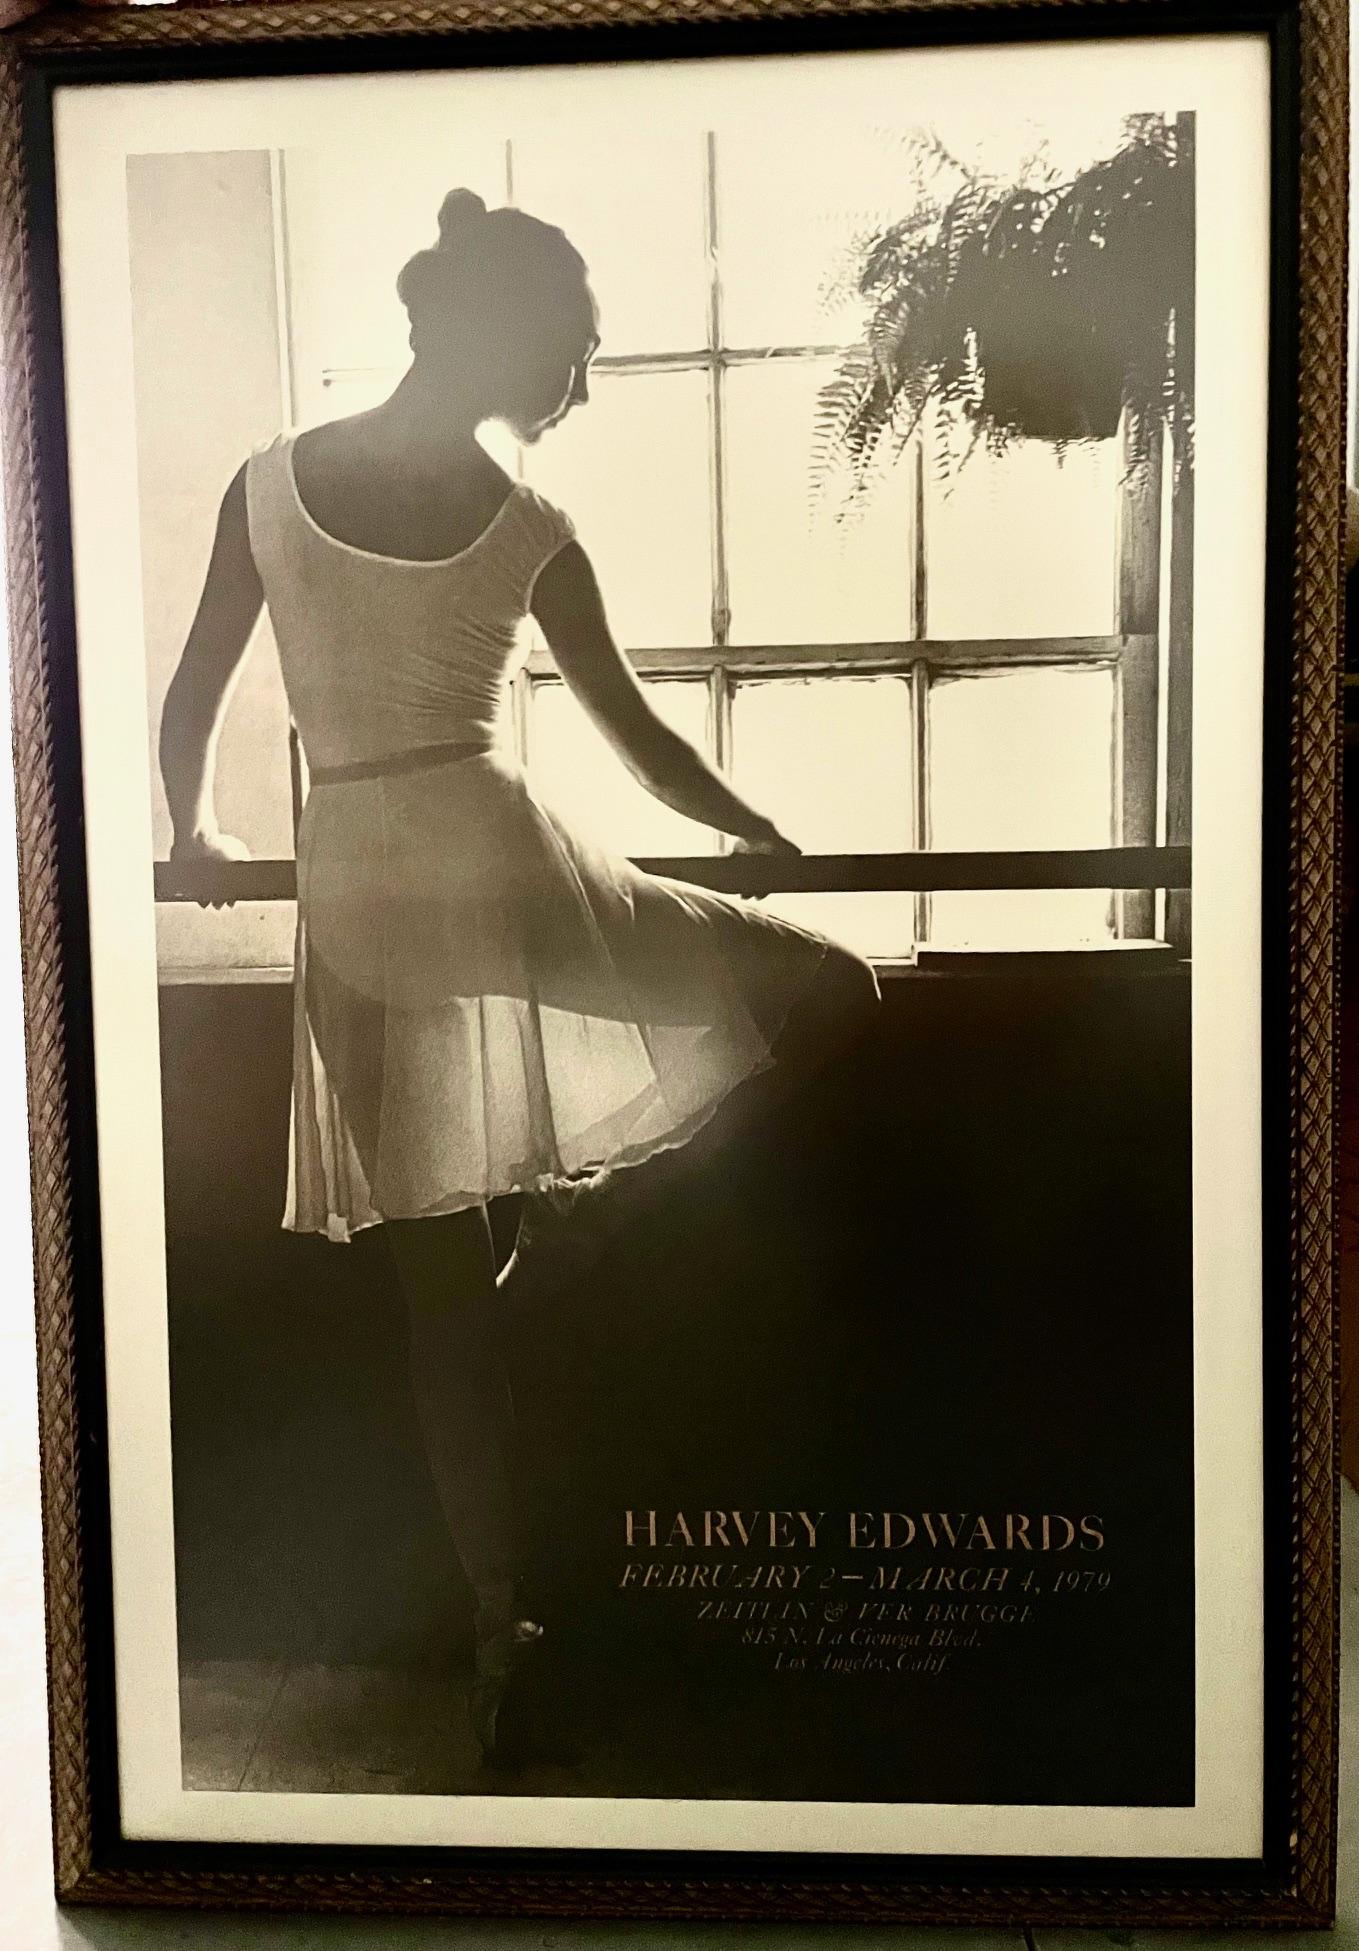 Ballerina at the Barre   (Poster with photography by Harvey Edwards)